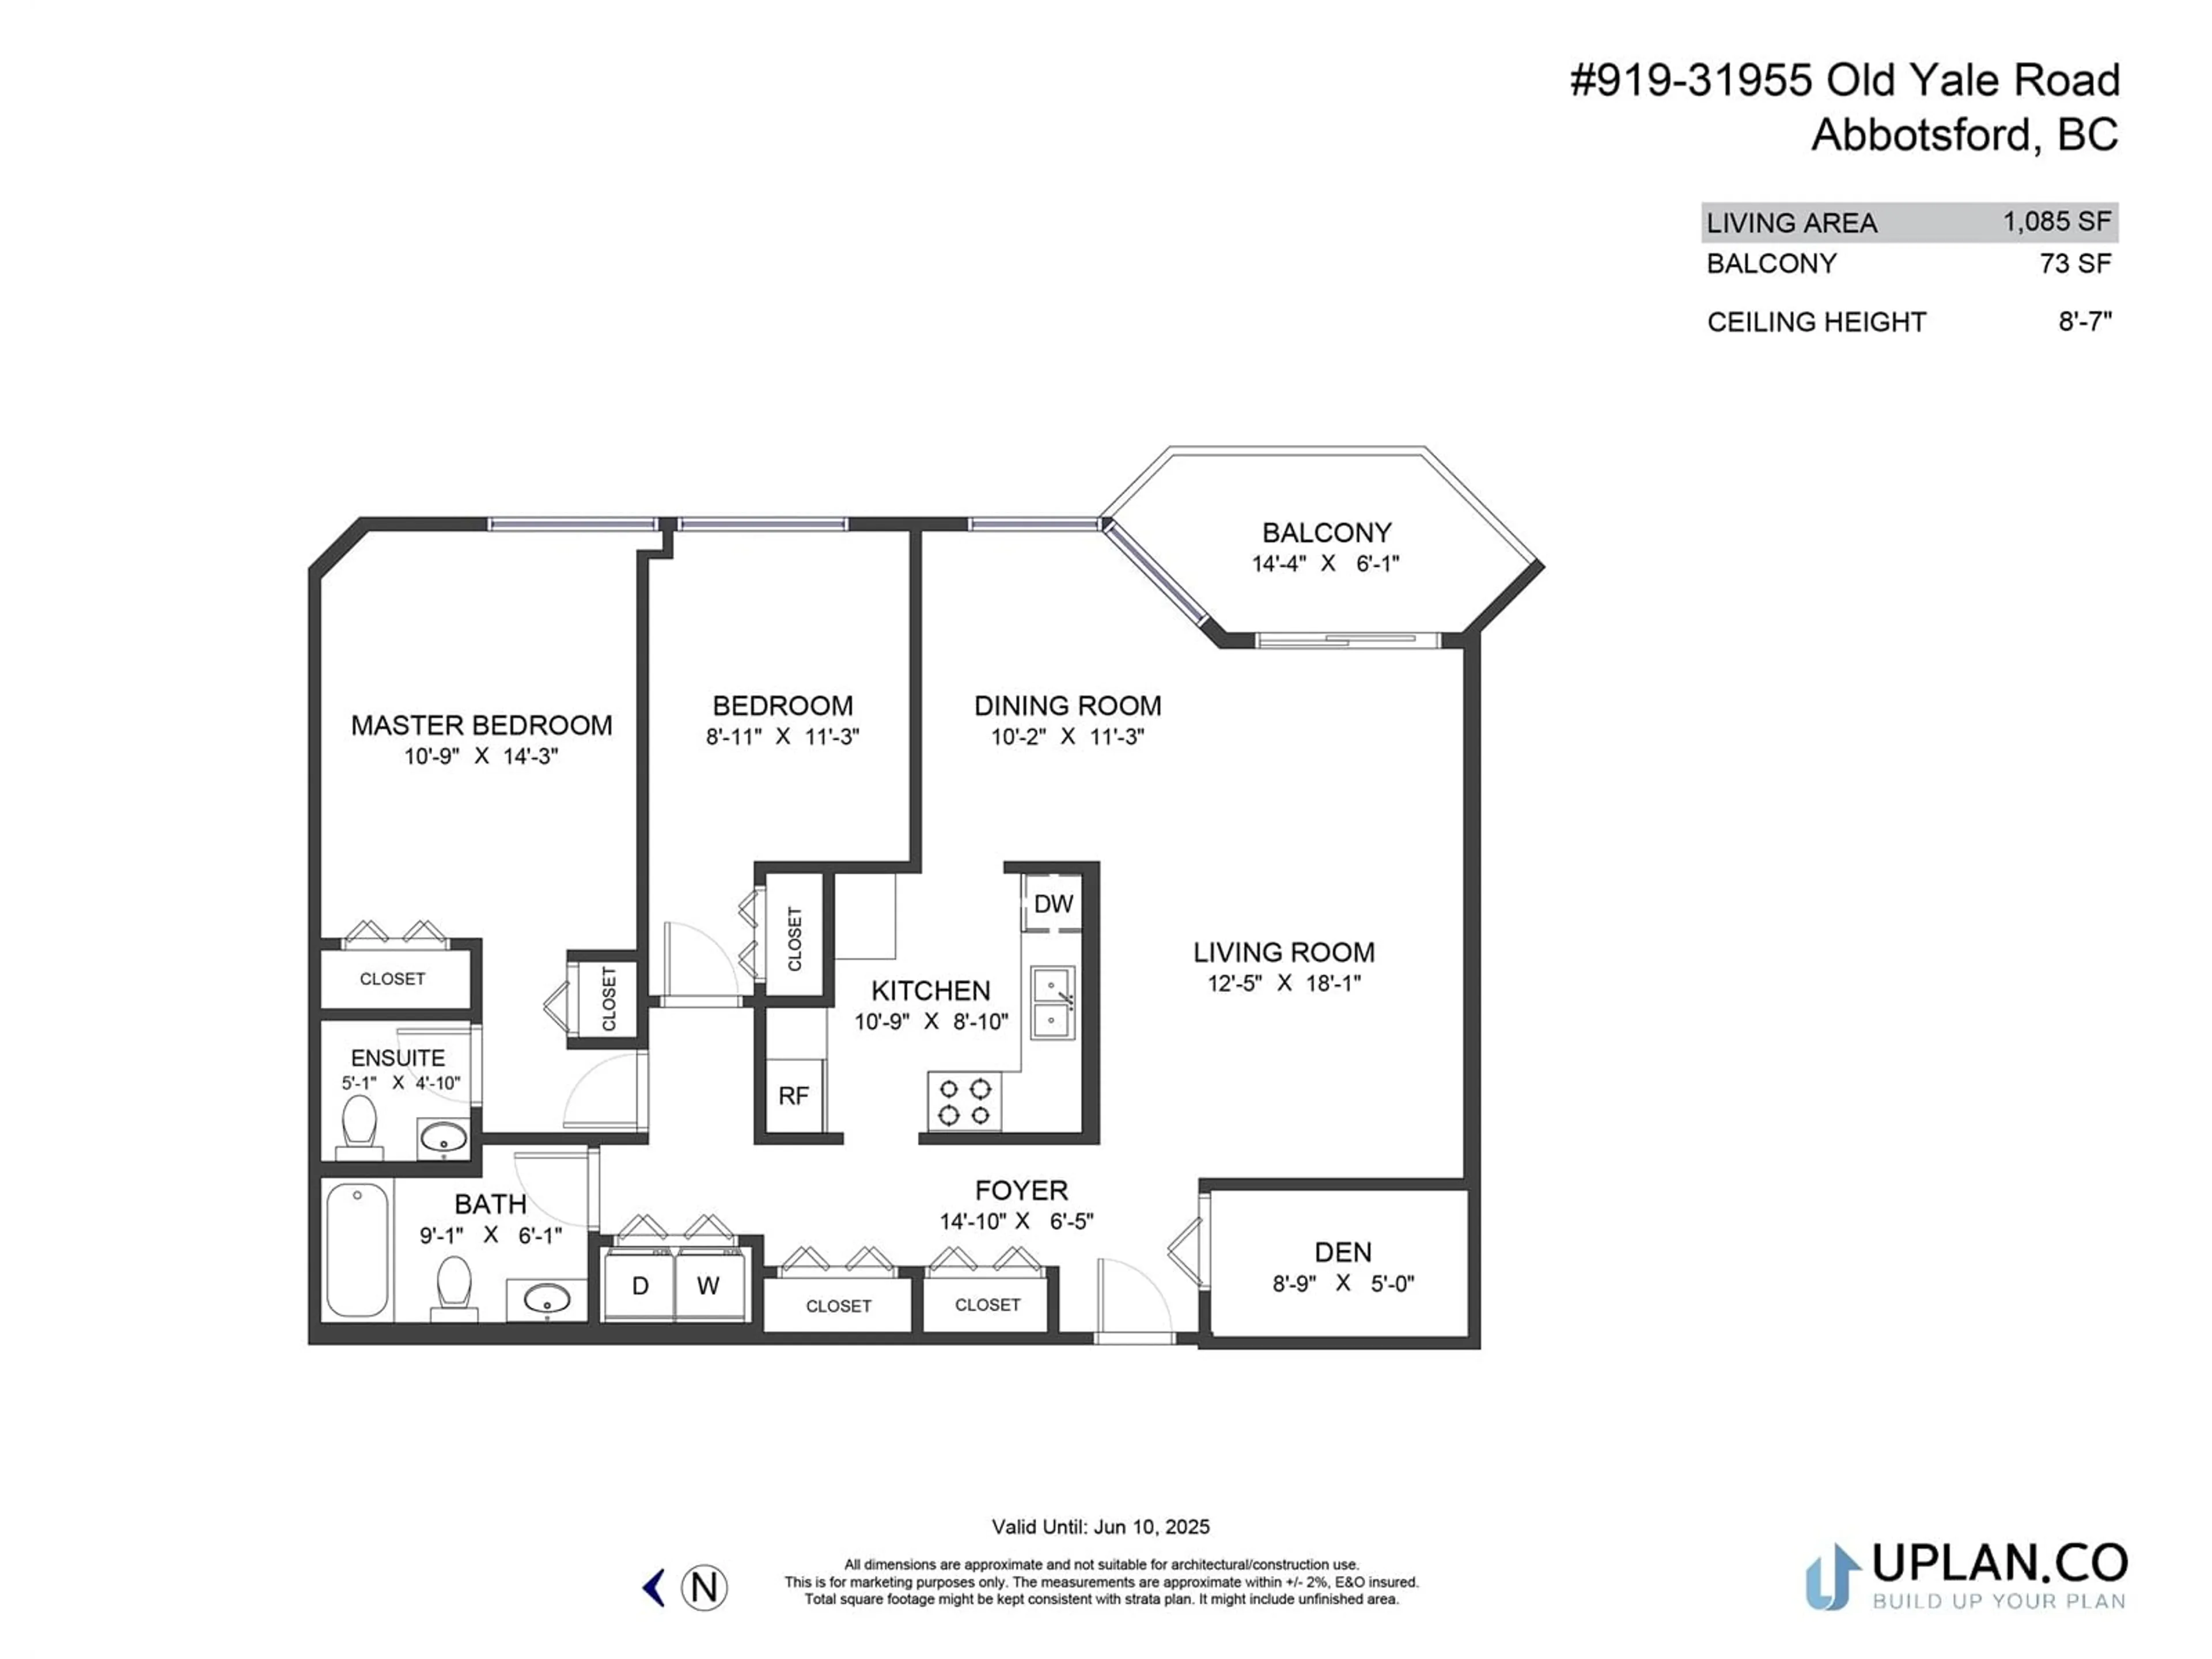 Floor plan for 919 31955 OLD YALE ROAD, Abbotsford British Columbia V2T4N1